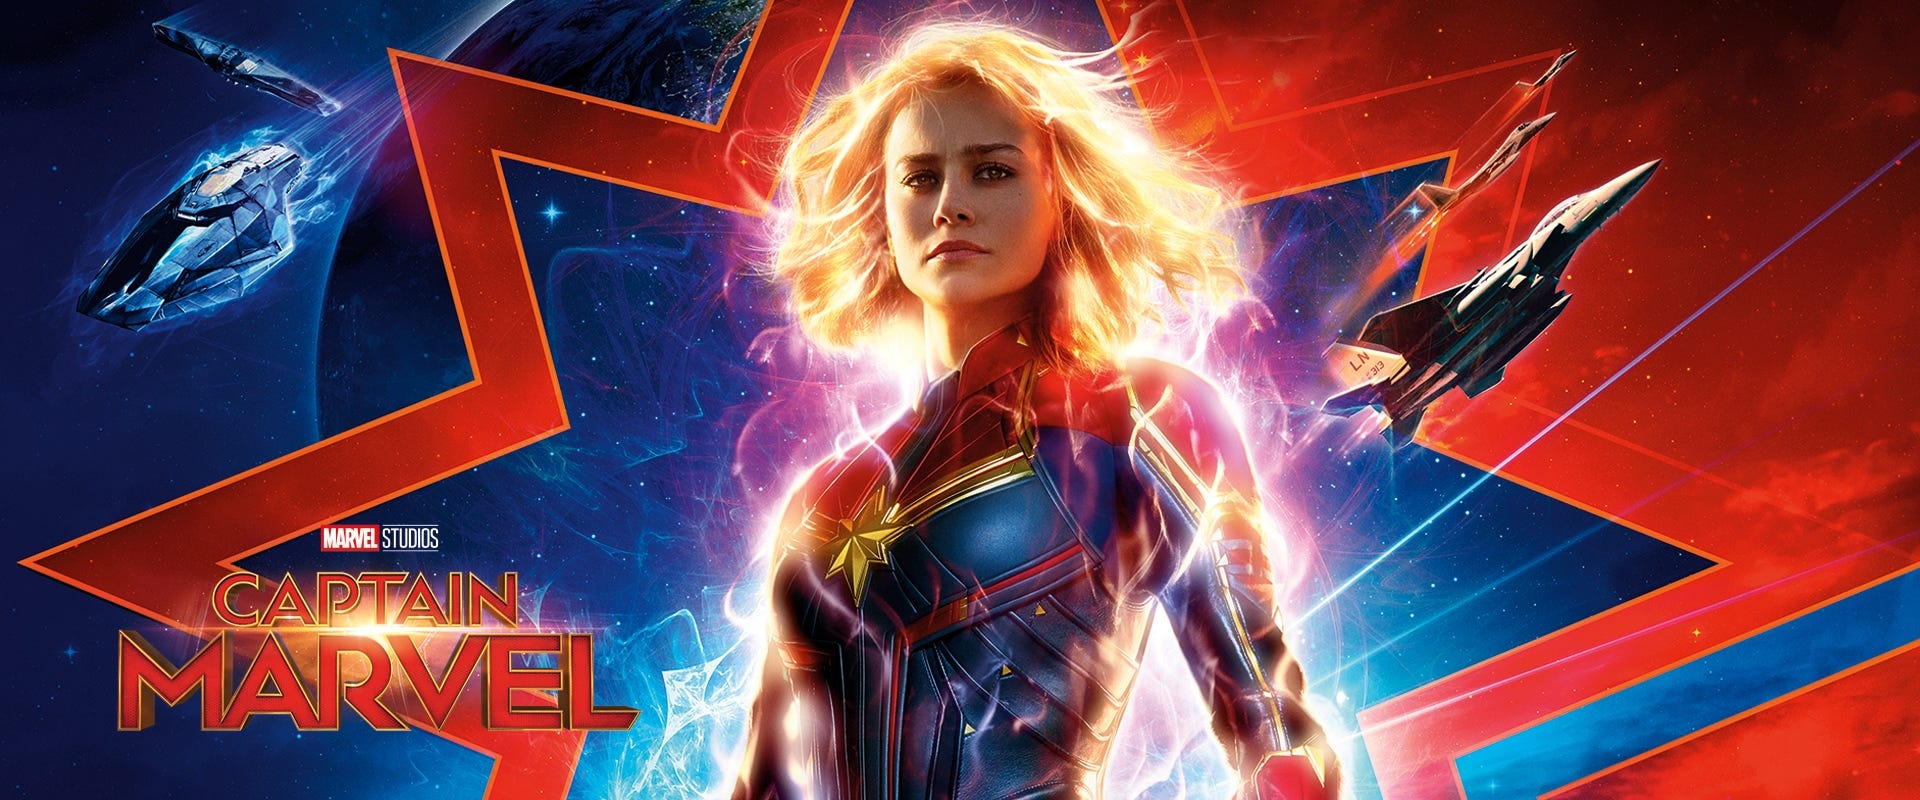 Captain Marvel” — Finally, a Superhero We Can Love. | by Penseur Rodinson |  Noteworthy - The Journal Blog